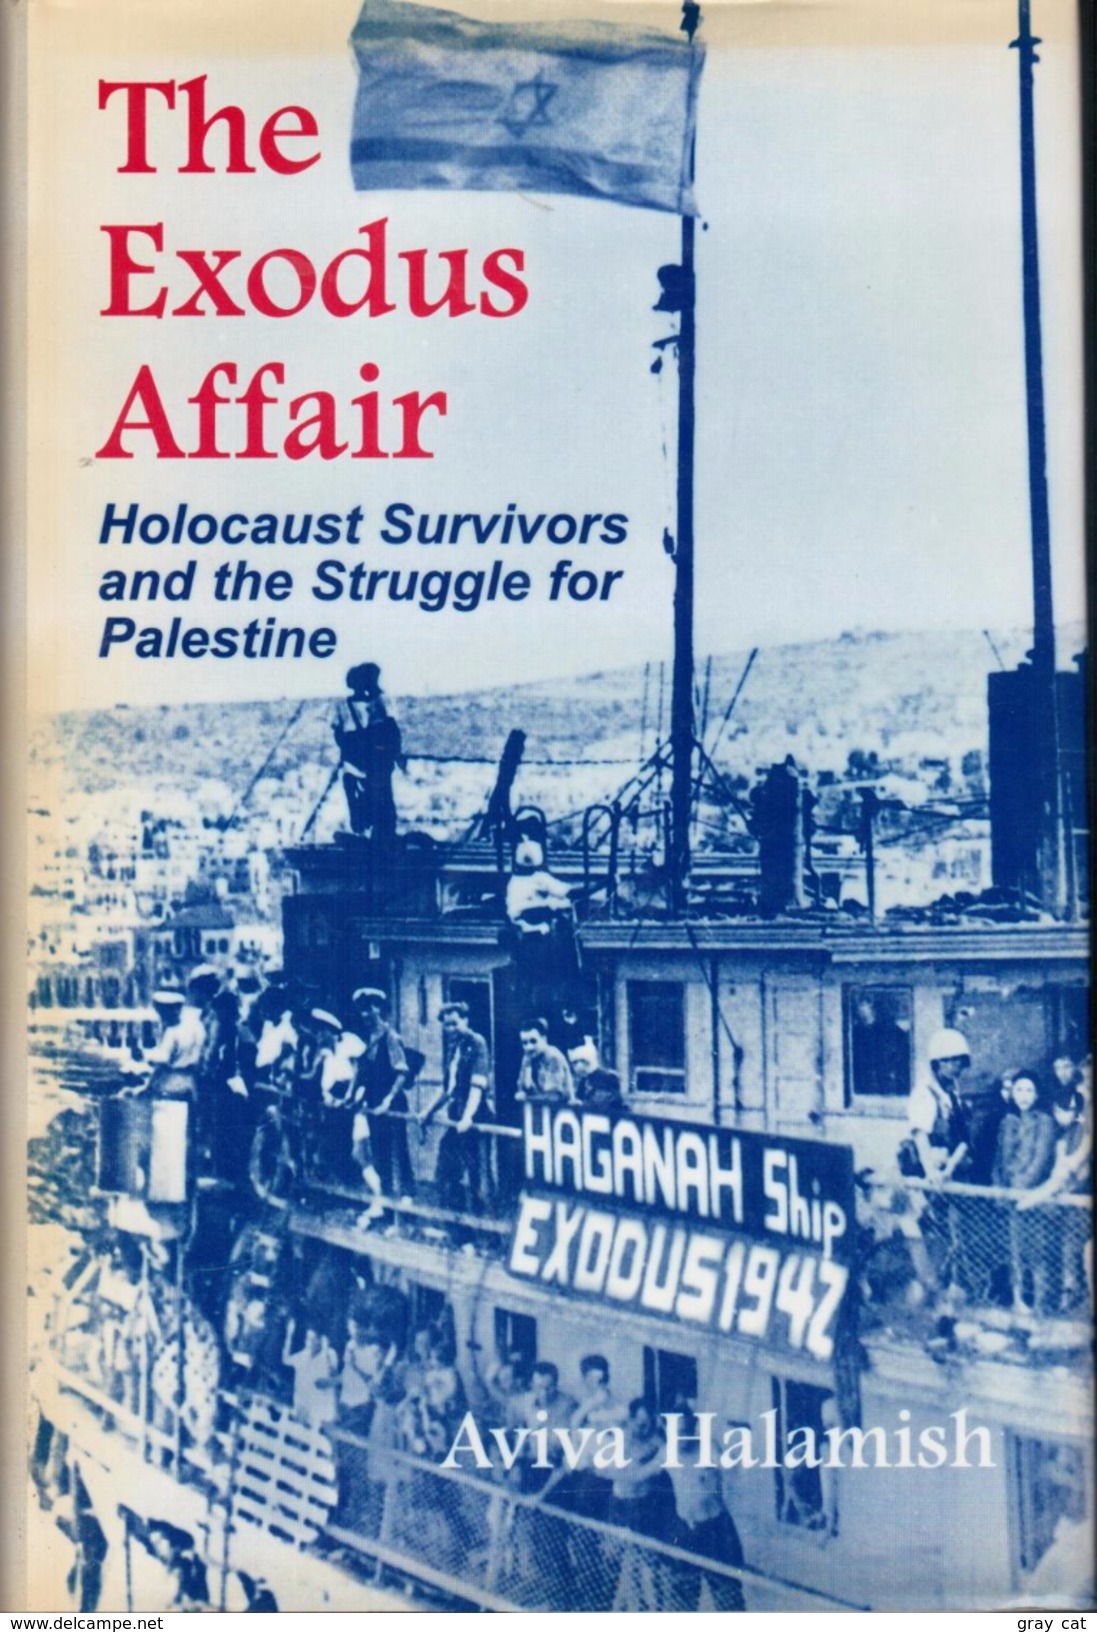 The Exodus Affair: Holocaust Survivors And The Struggle For Palestine By Aviva Halamish (ISBN 9780853033424) - Midden-Oosten